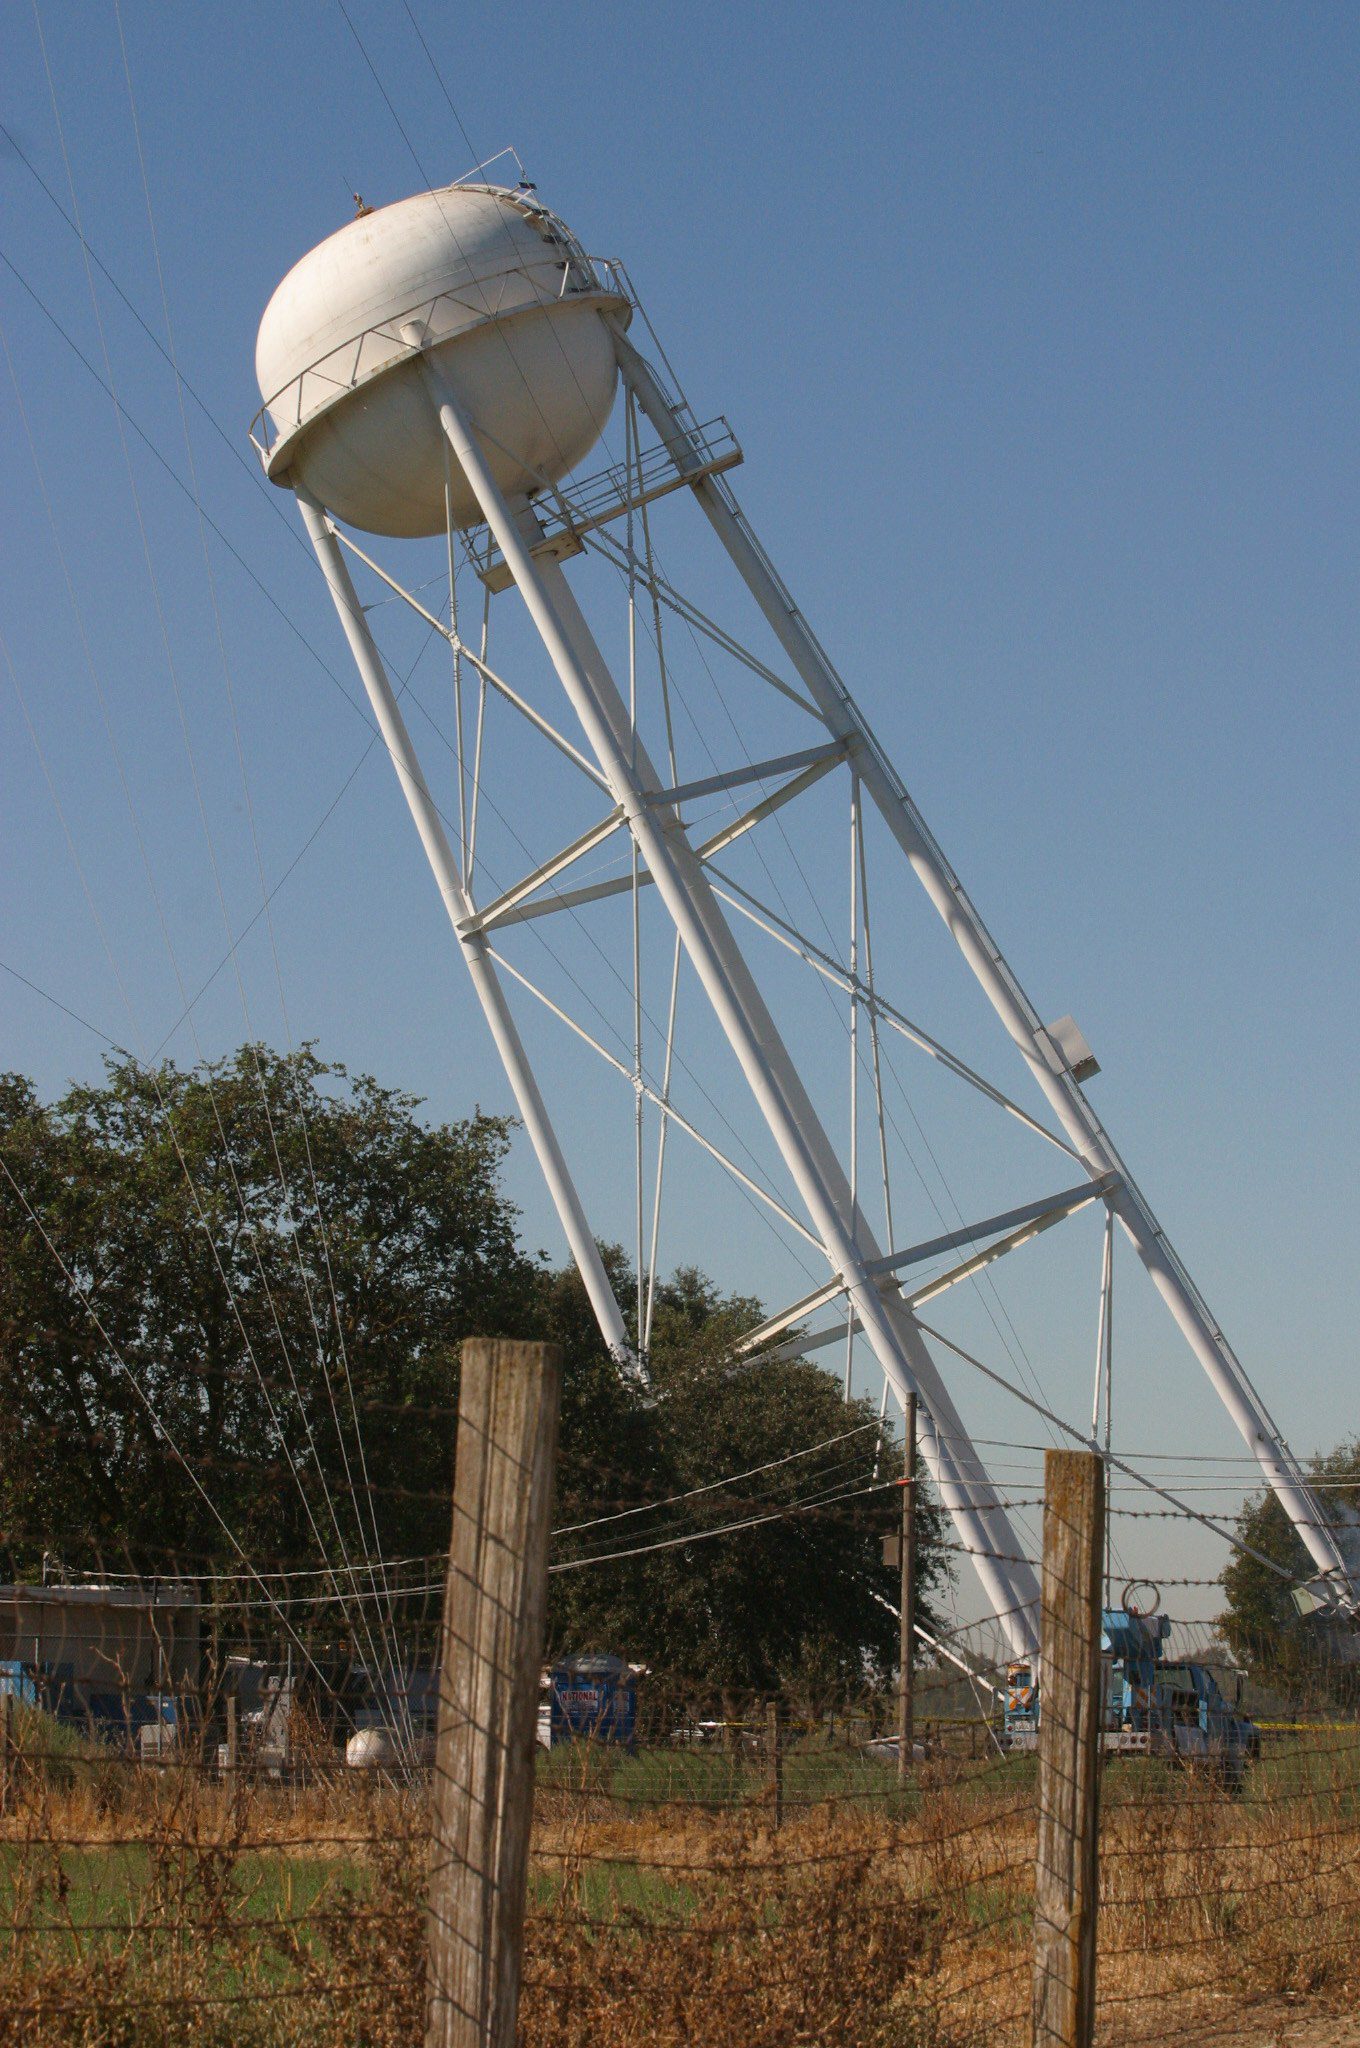 Photograph of water tower being pulled down